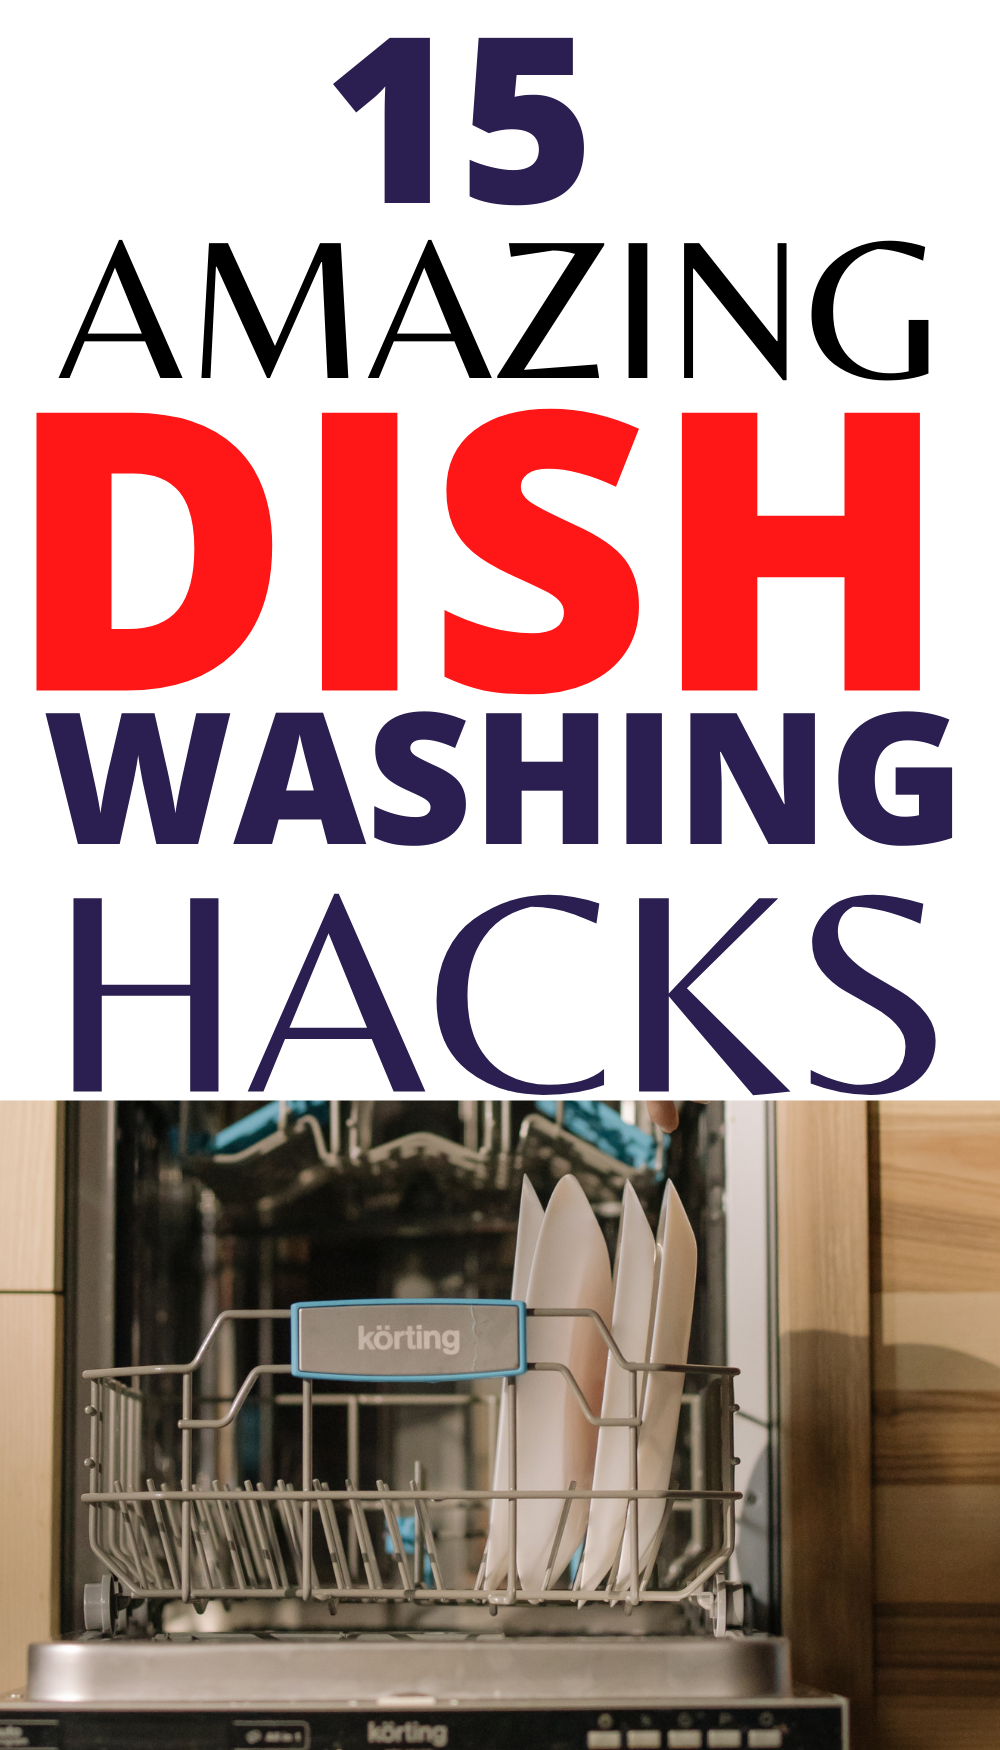 How To Do Dishes FASTER and EASIER? How do you wash dishes like a pro? Here you have 15 amazing dish washing tips and hacks that really works and get time for some other things that really matters.